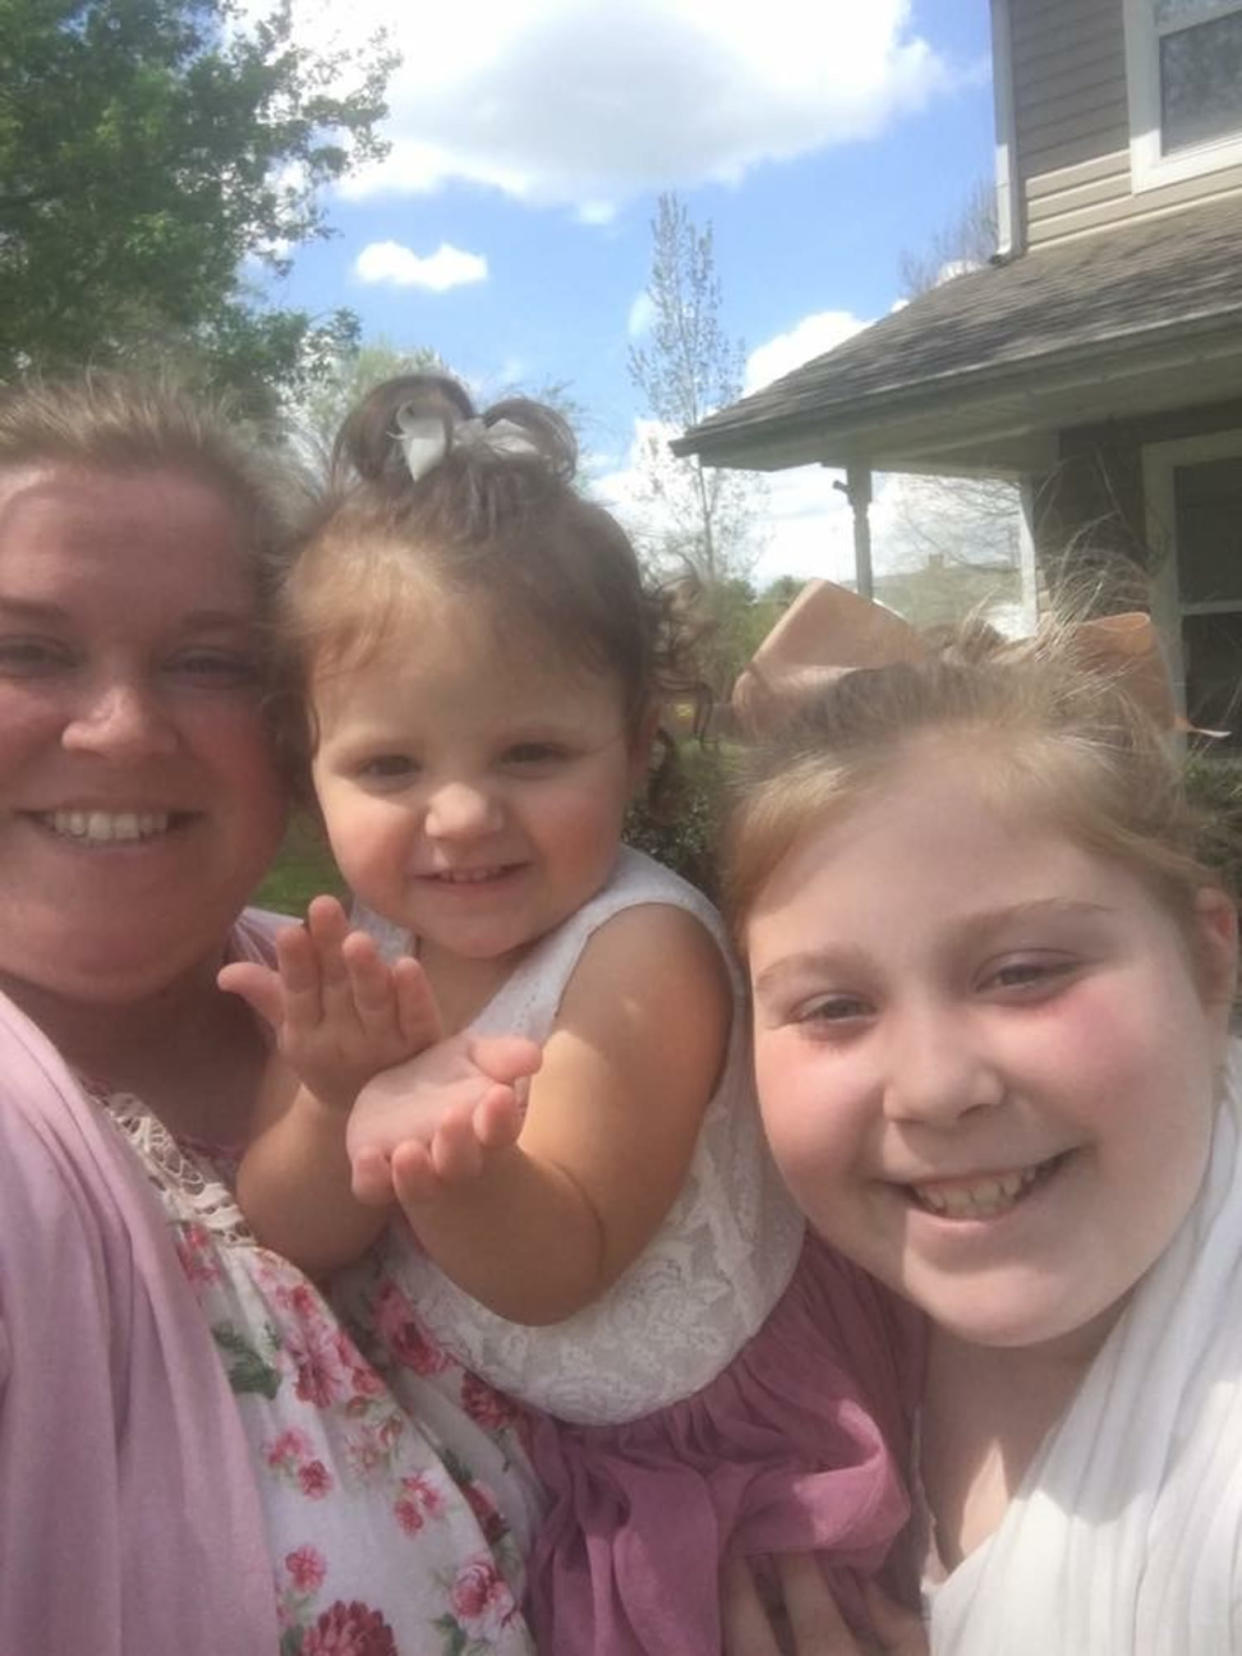 Tana Benson, pictured in 2017 with her daughters, Teegan and Taylor. (Tana Benson)